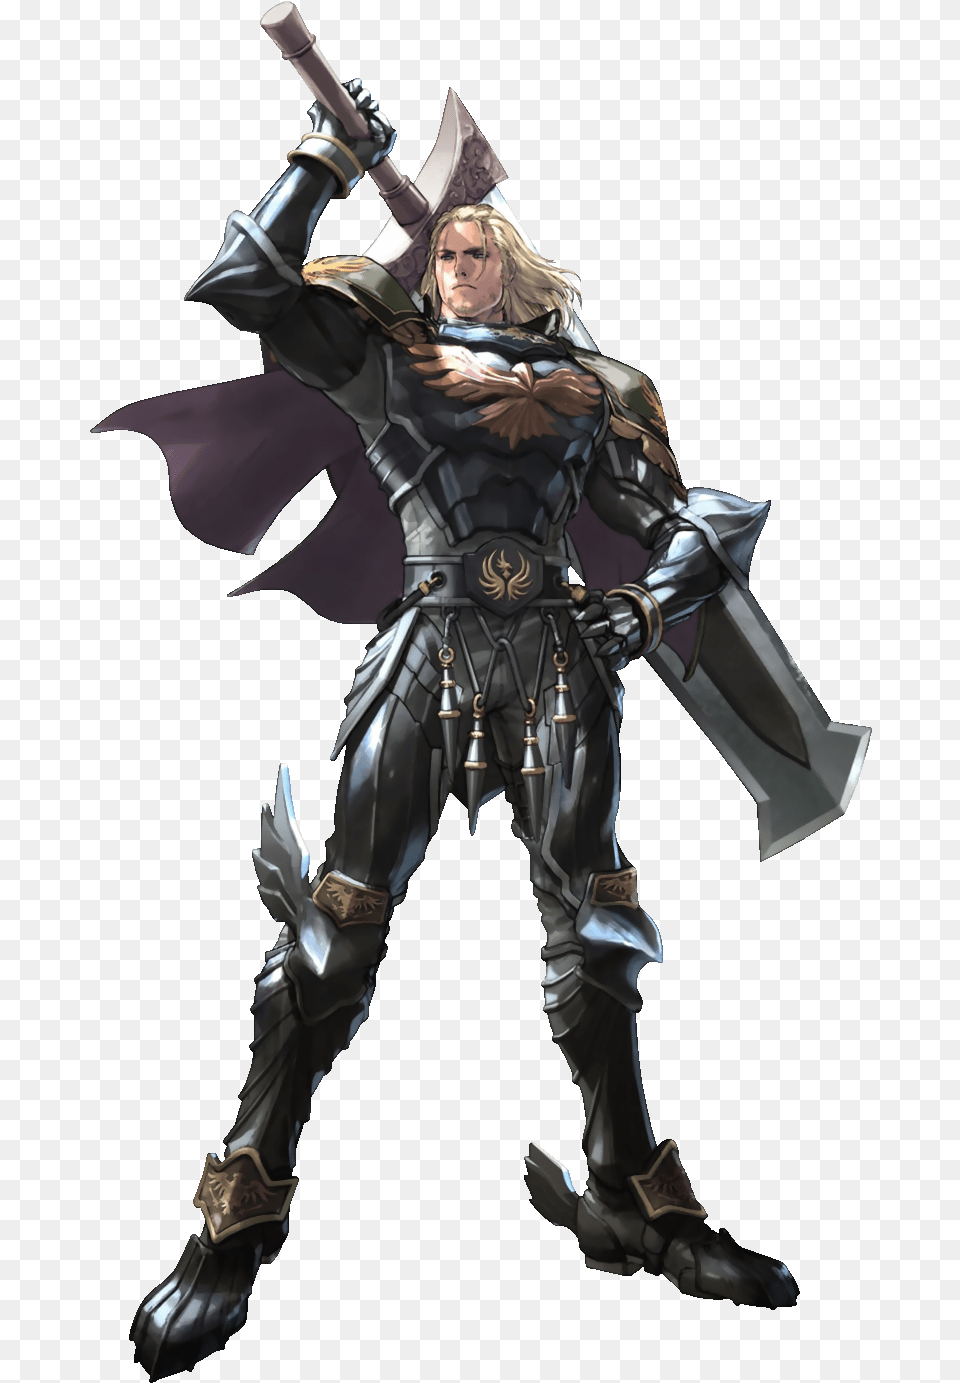 Siegfried Schtauffen As He Appears In Soul Calibur Siegfried Soul Calibur V, Adult, Clothing, Costume, Female Free Transparent Png